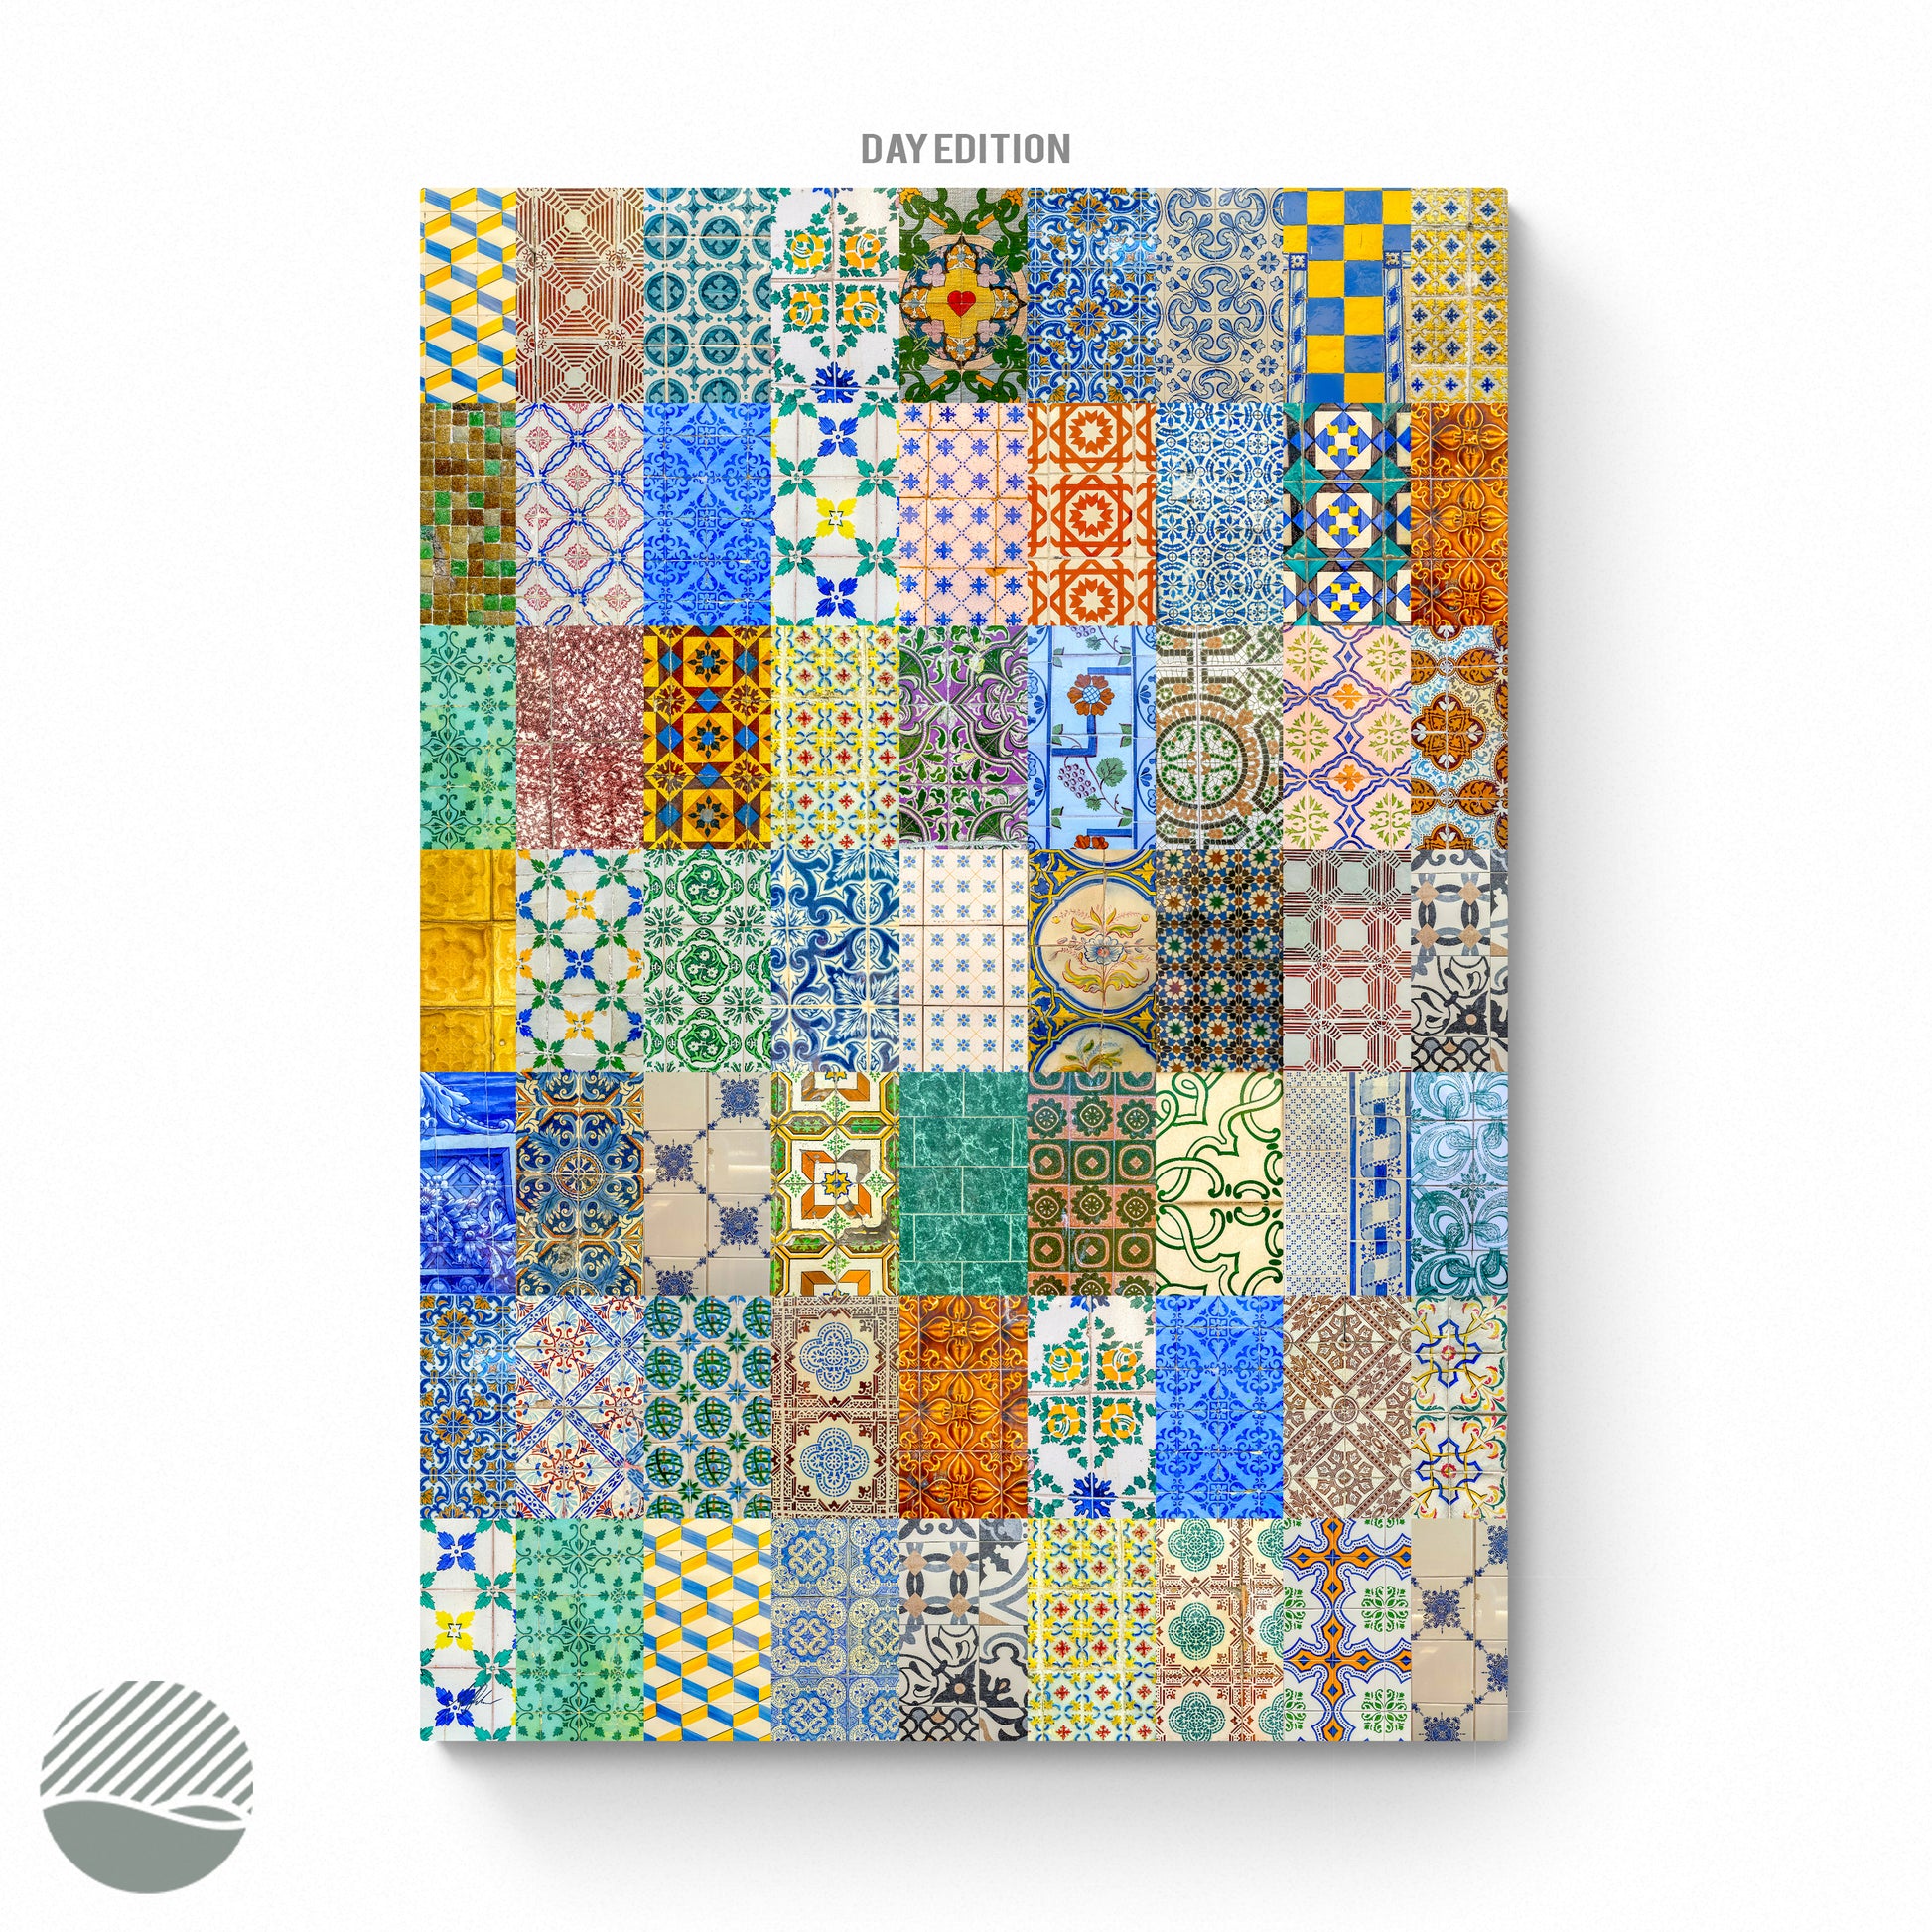 Tiles of Lisboa by Alantherock - day edition